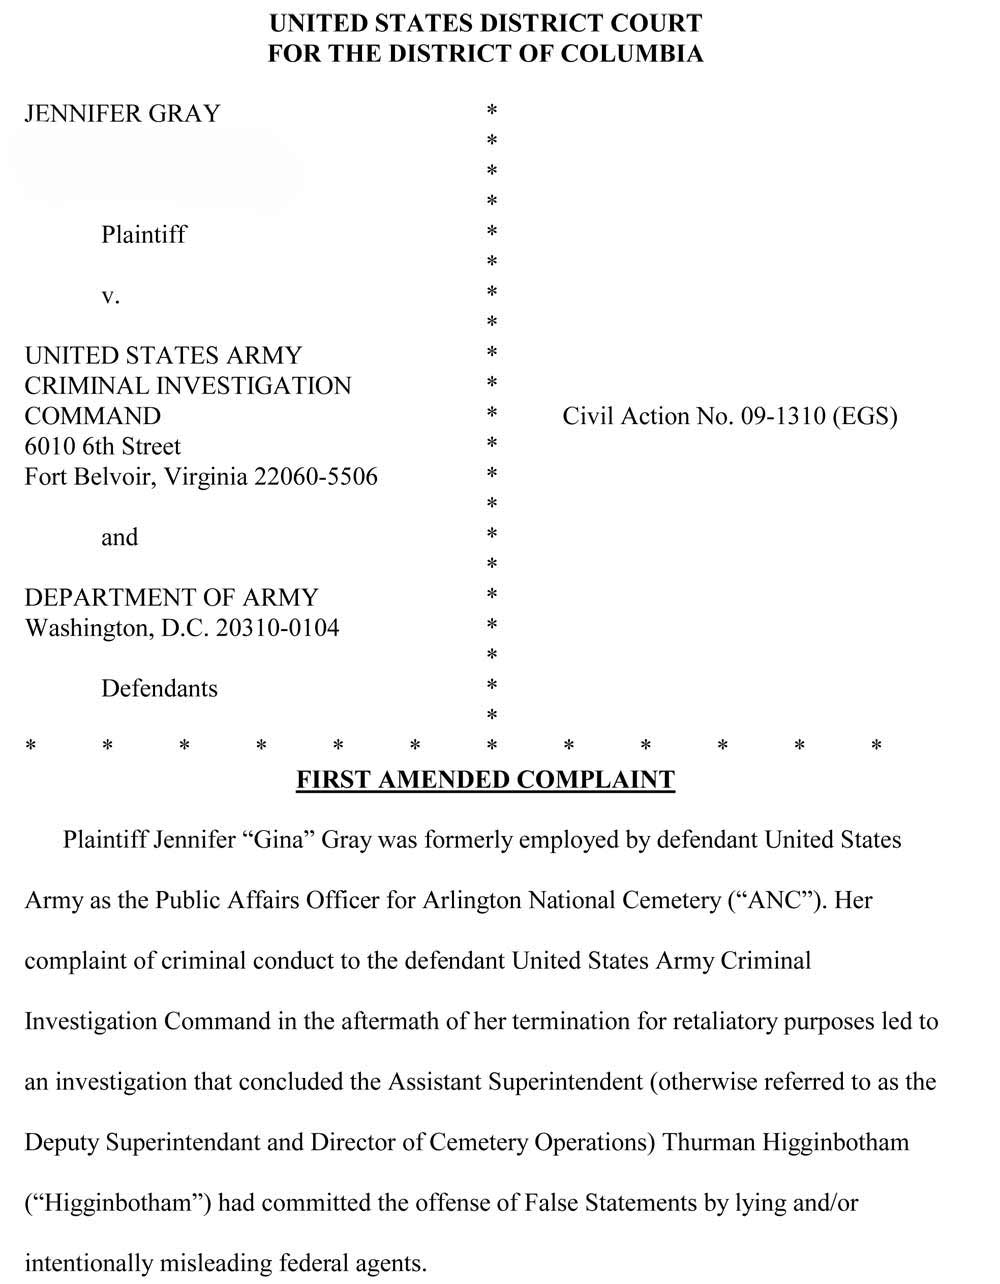 gray-first-amended-complaint-final-11-9-09-1